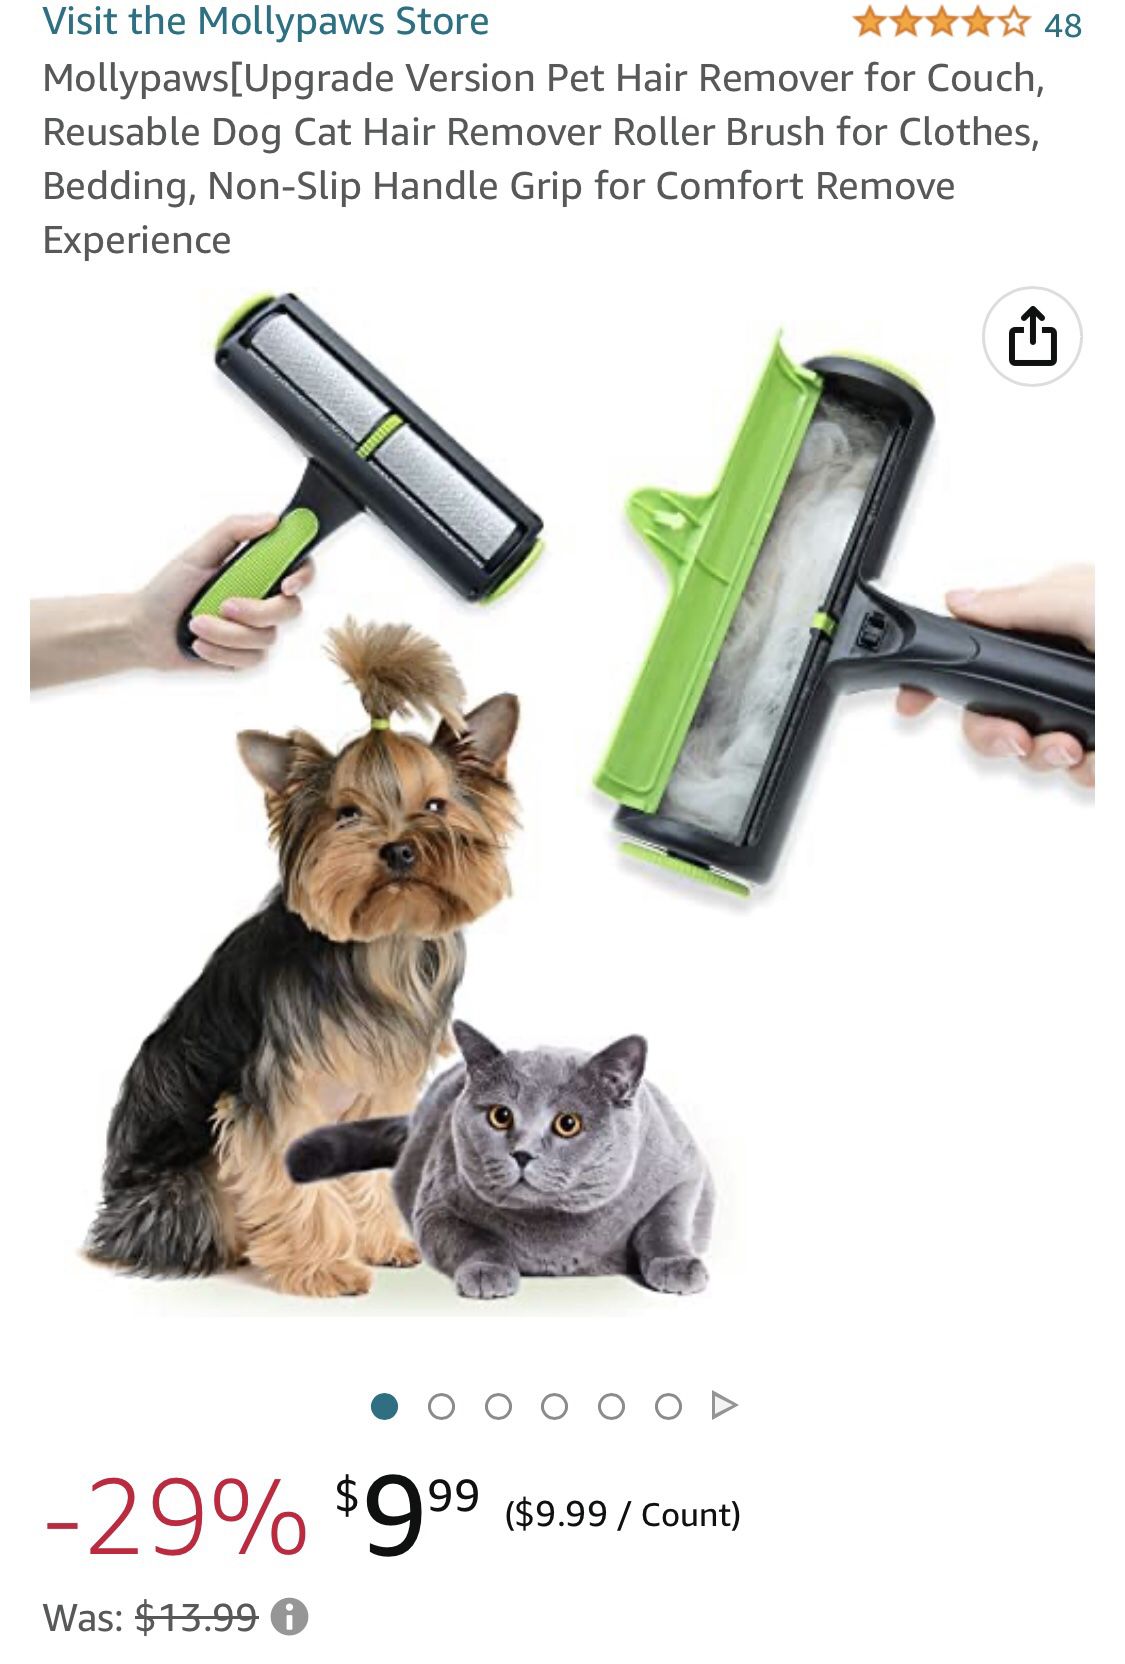 Pet Hair Remover for Couch, Reusable Dog Cat Hair Remover Roller Brush for Clothes, Bedding, Non-Slip Handle Grip for Comfort Remove Experience